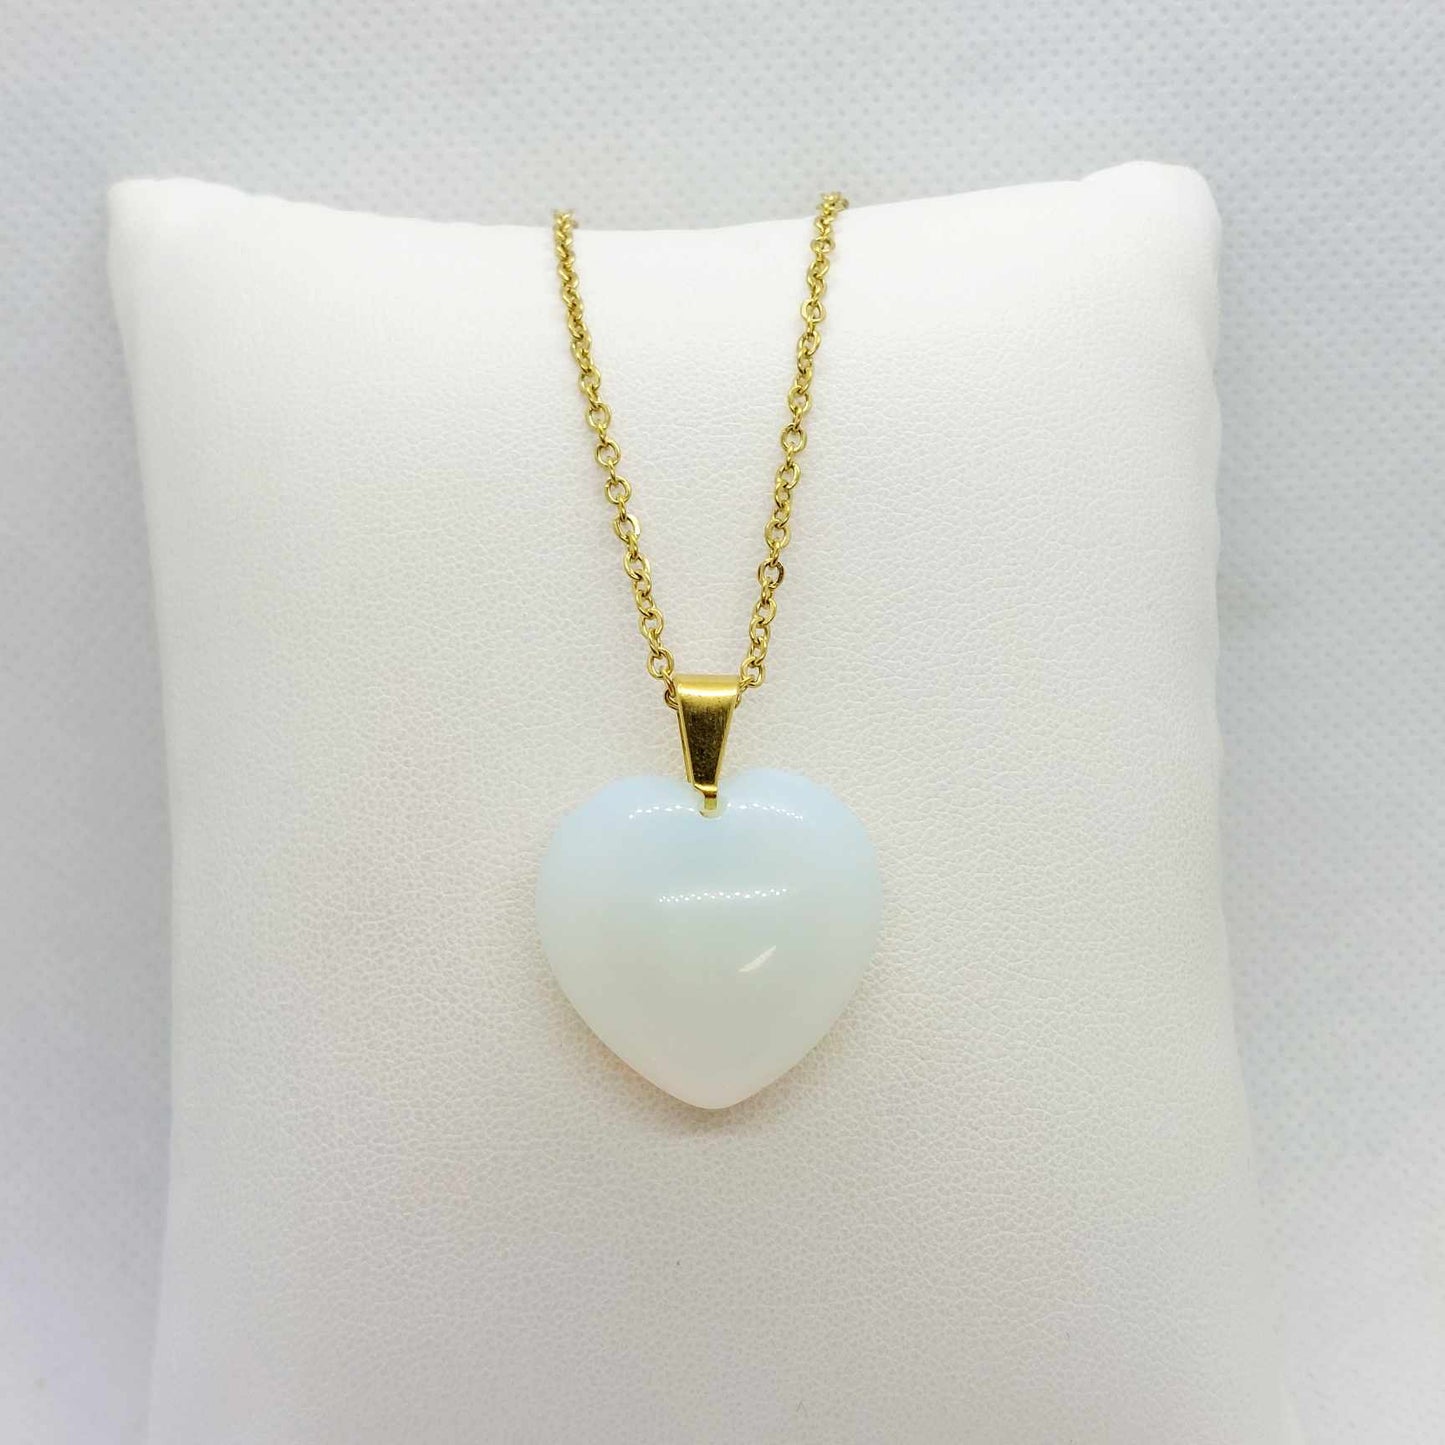 Natural Opal Heart Pendant with Stainless Steel Gold Plated Chain Necklace